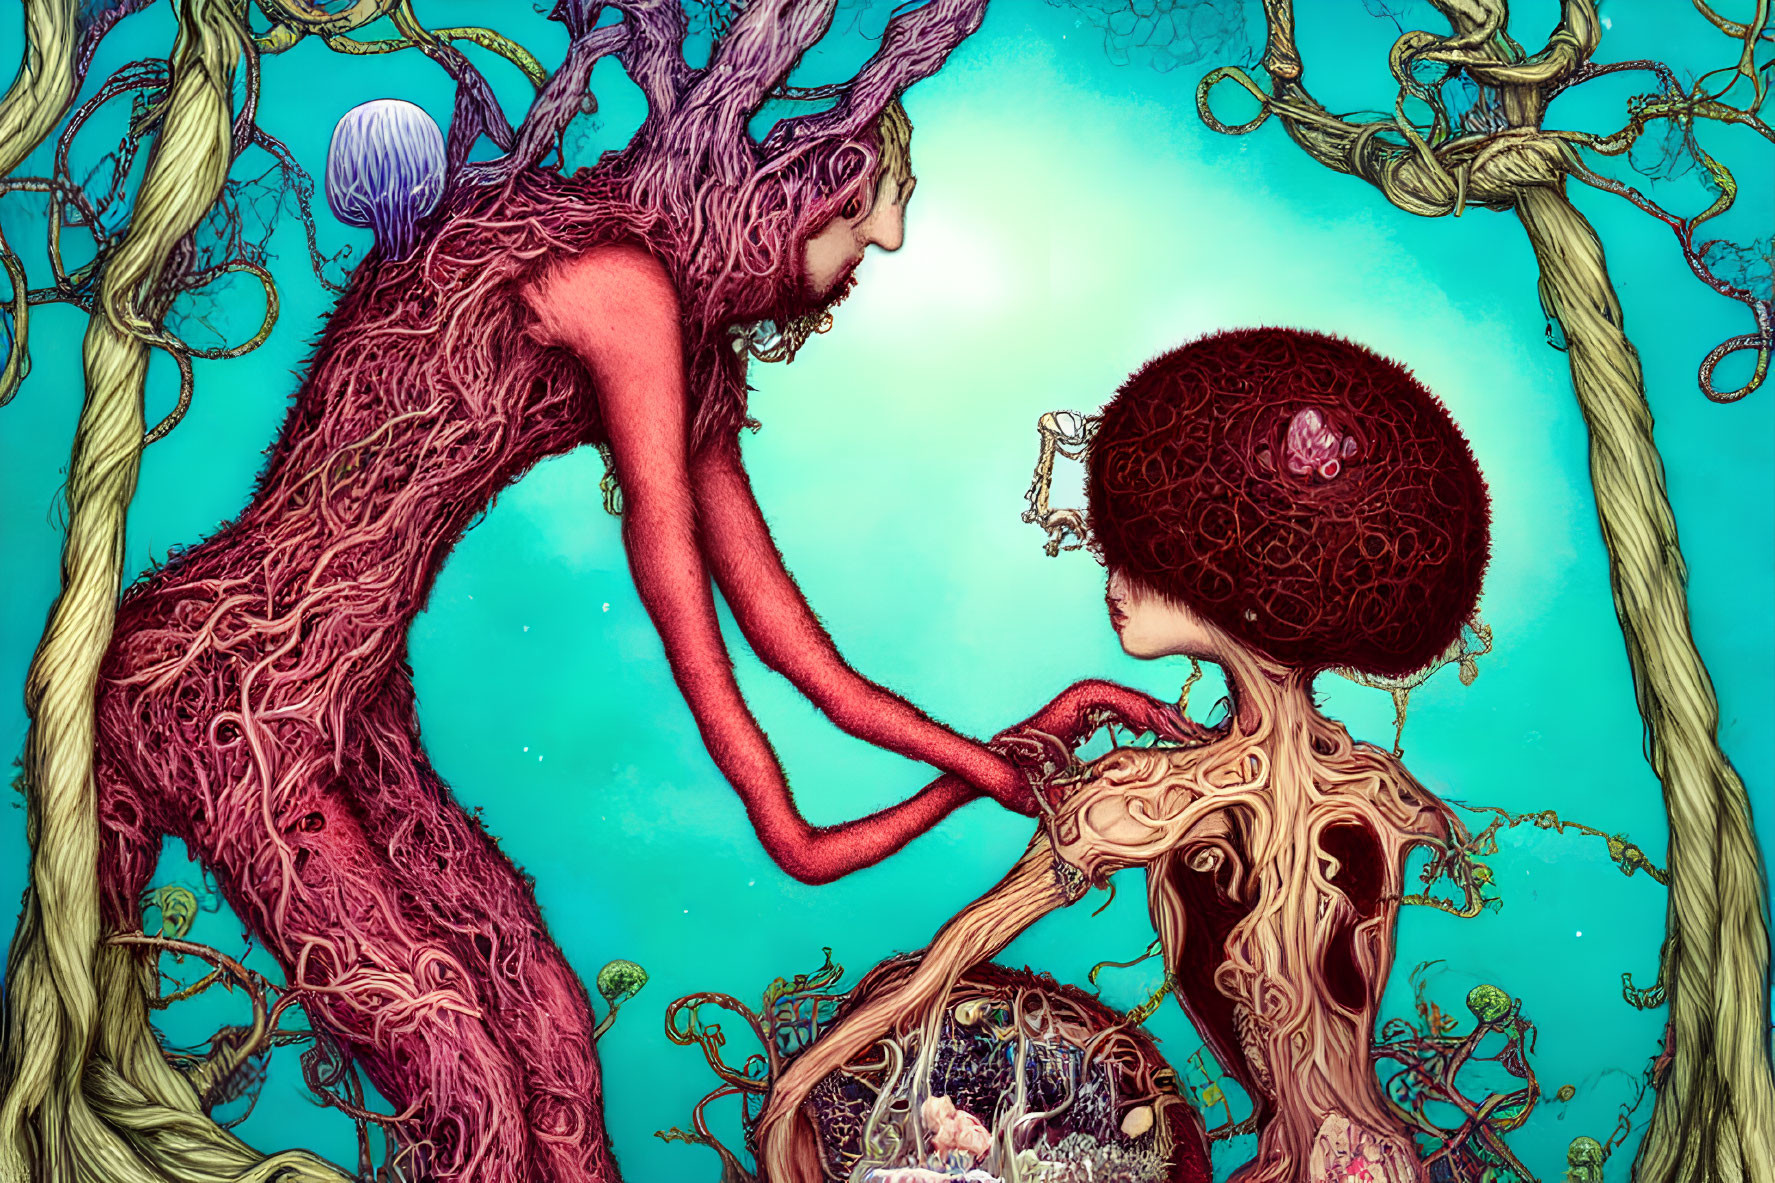 Surreal artwork featuring humanoid figures with tree-like features and jellyfish on teal background